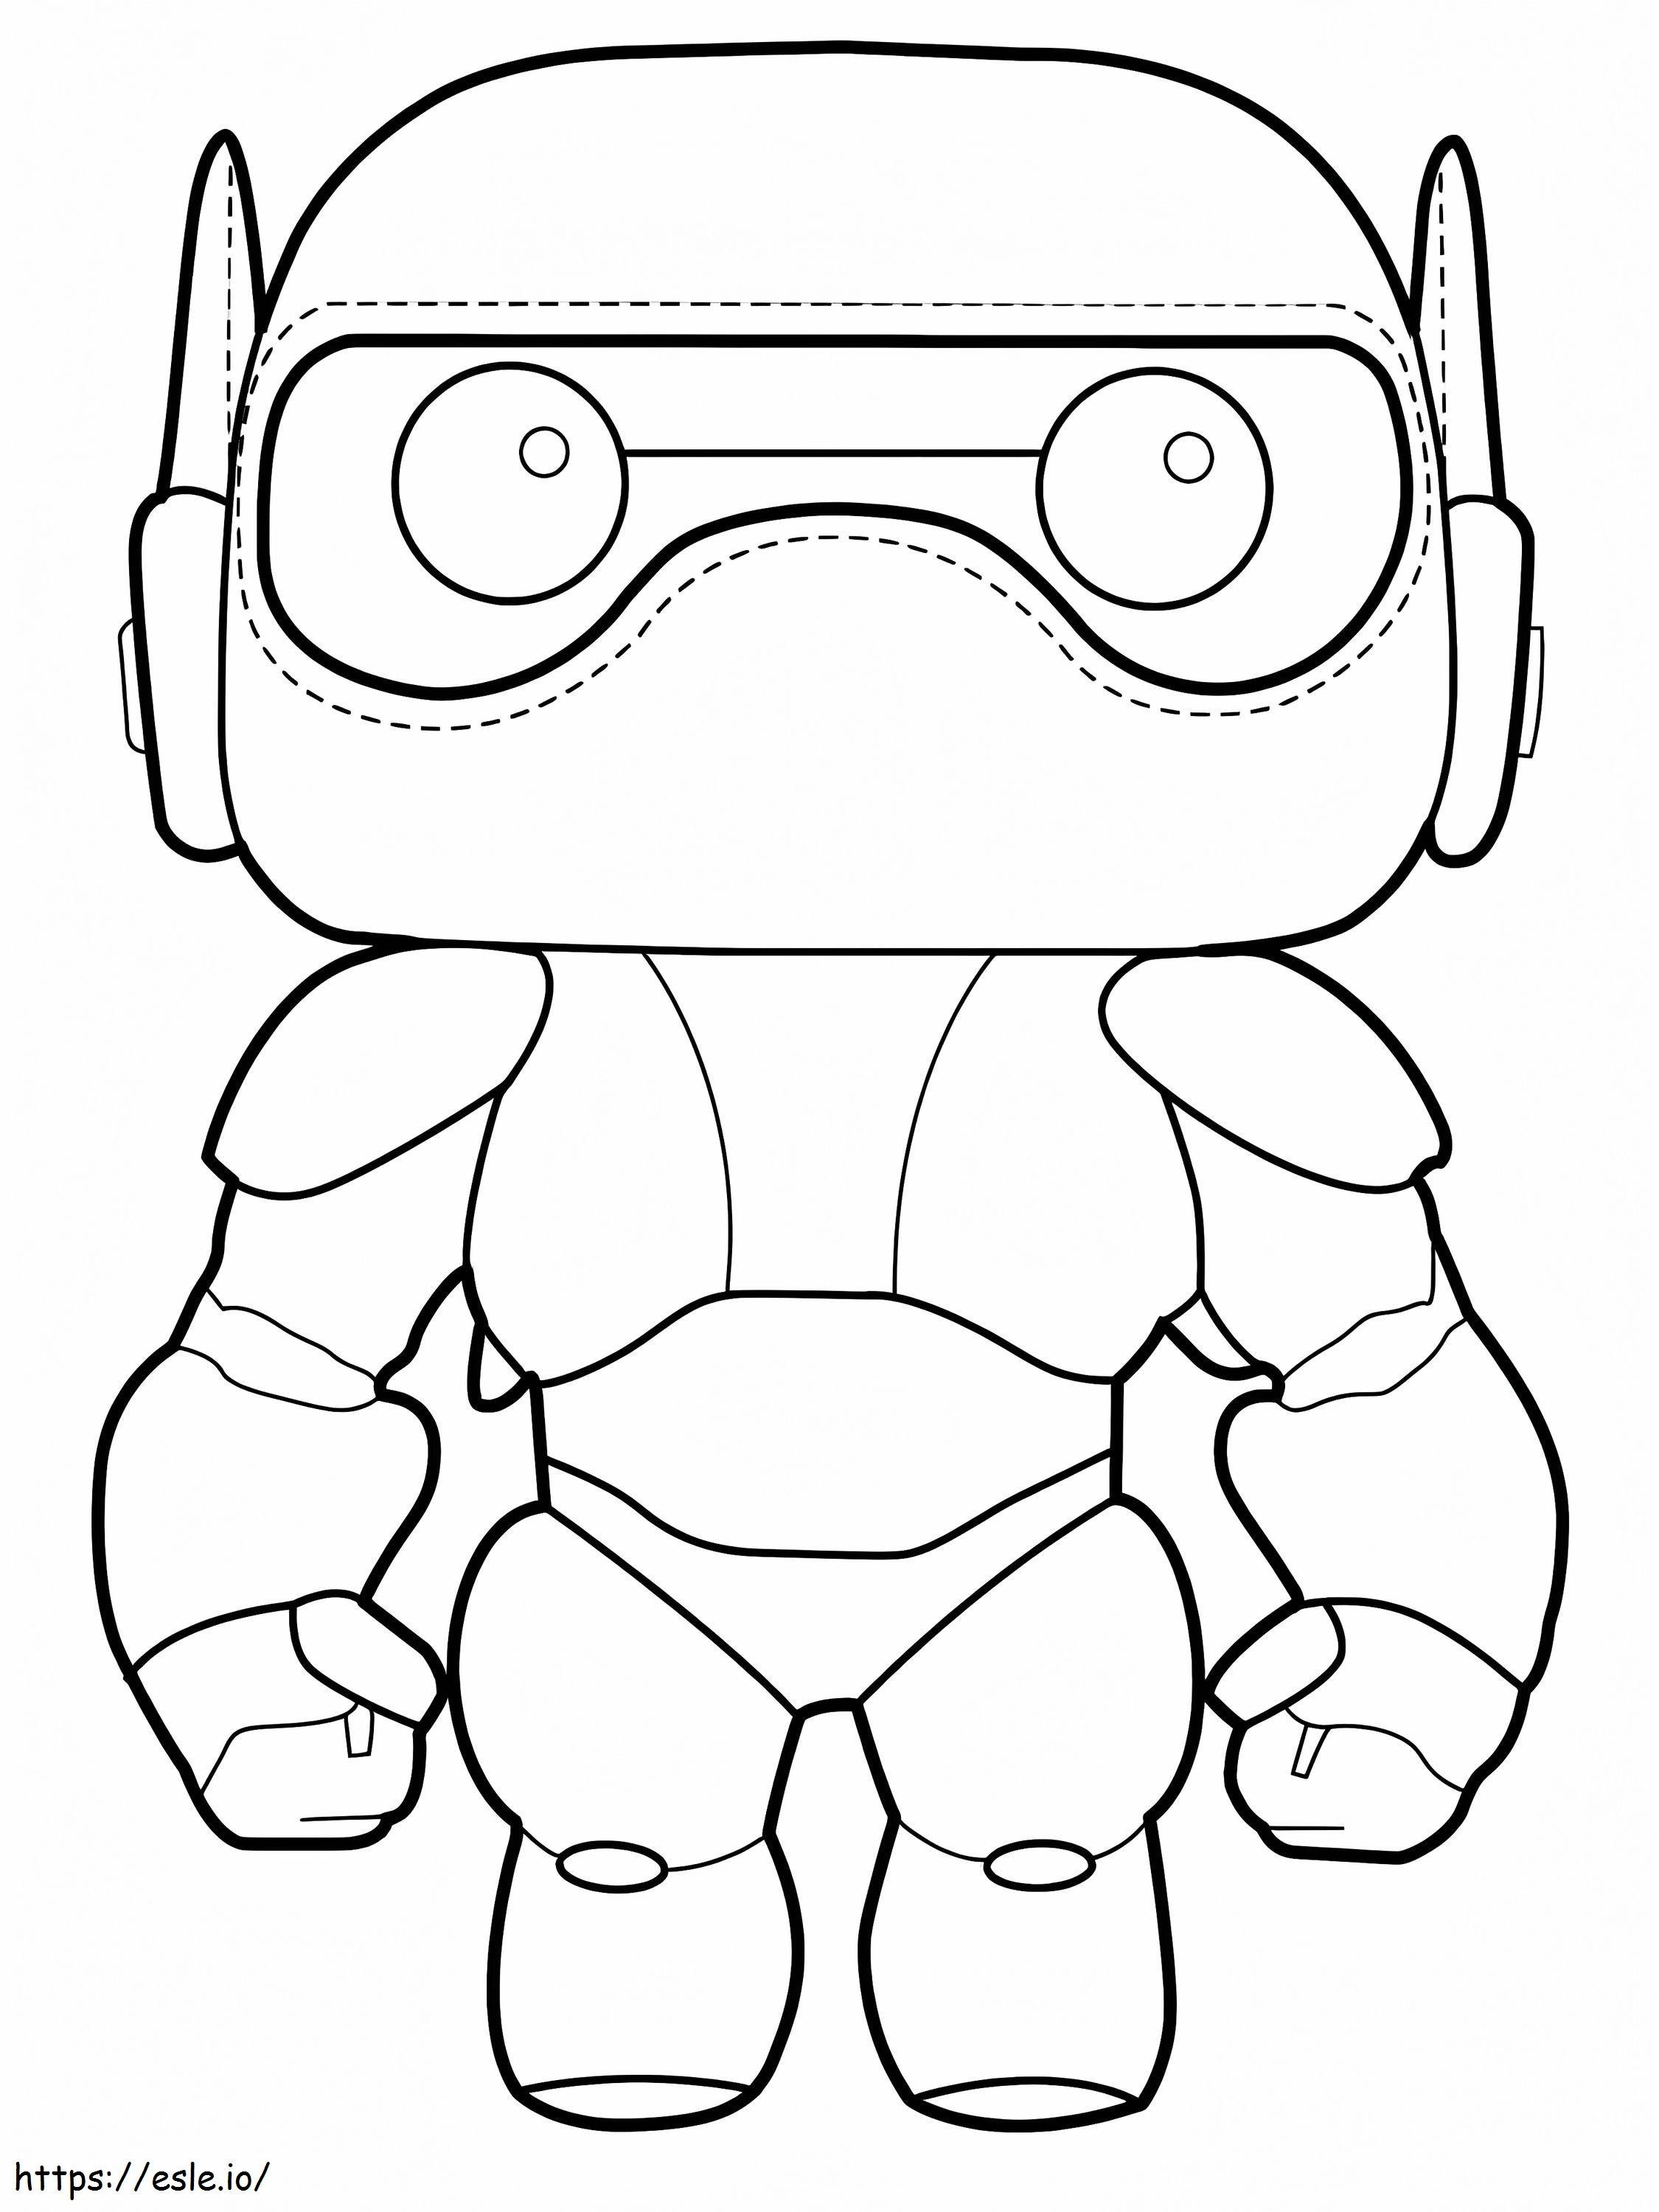 Chibi Armored Baymax coloring page